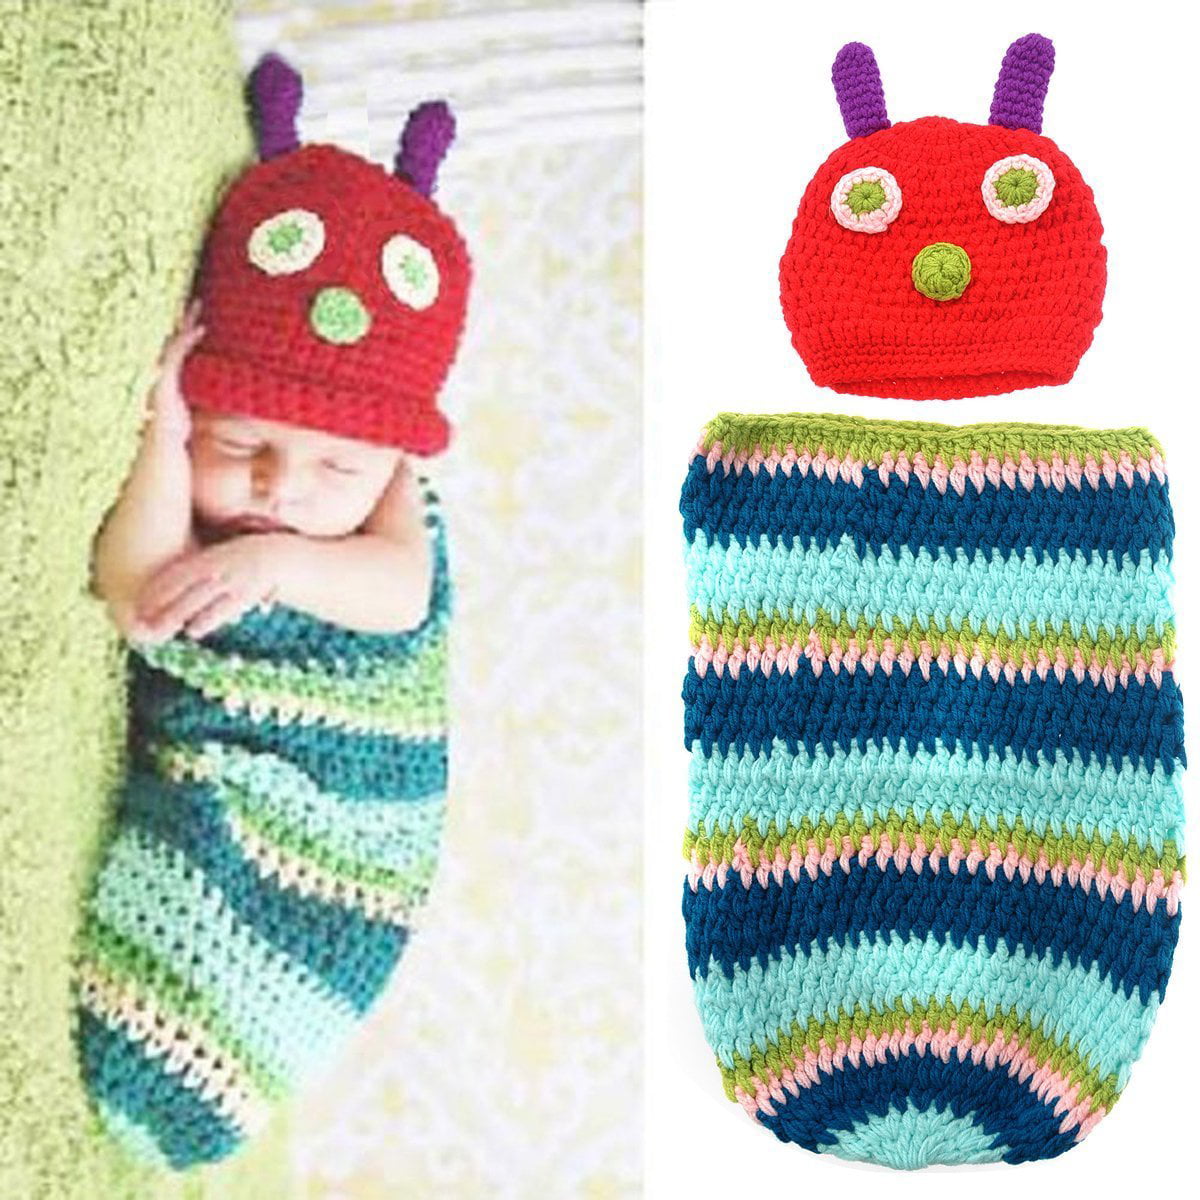 Infant Kids Girl Boy Knit Crochet Clothes Costume Photo Photography Props Outfit